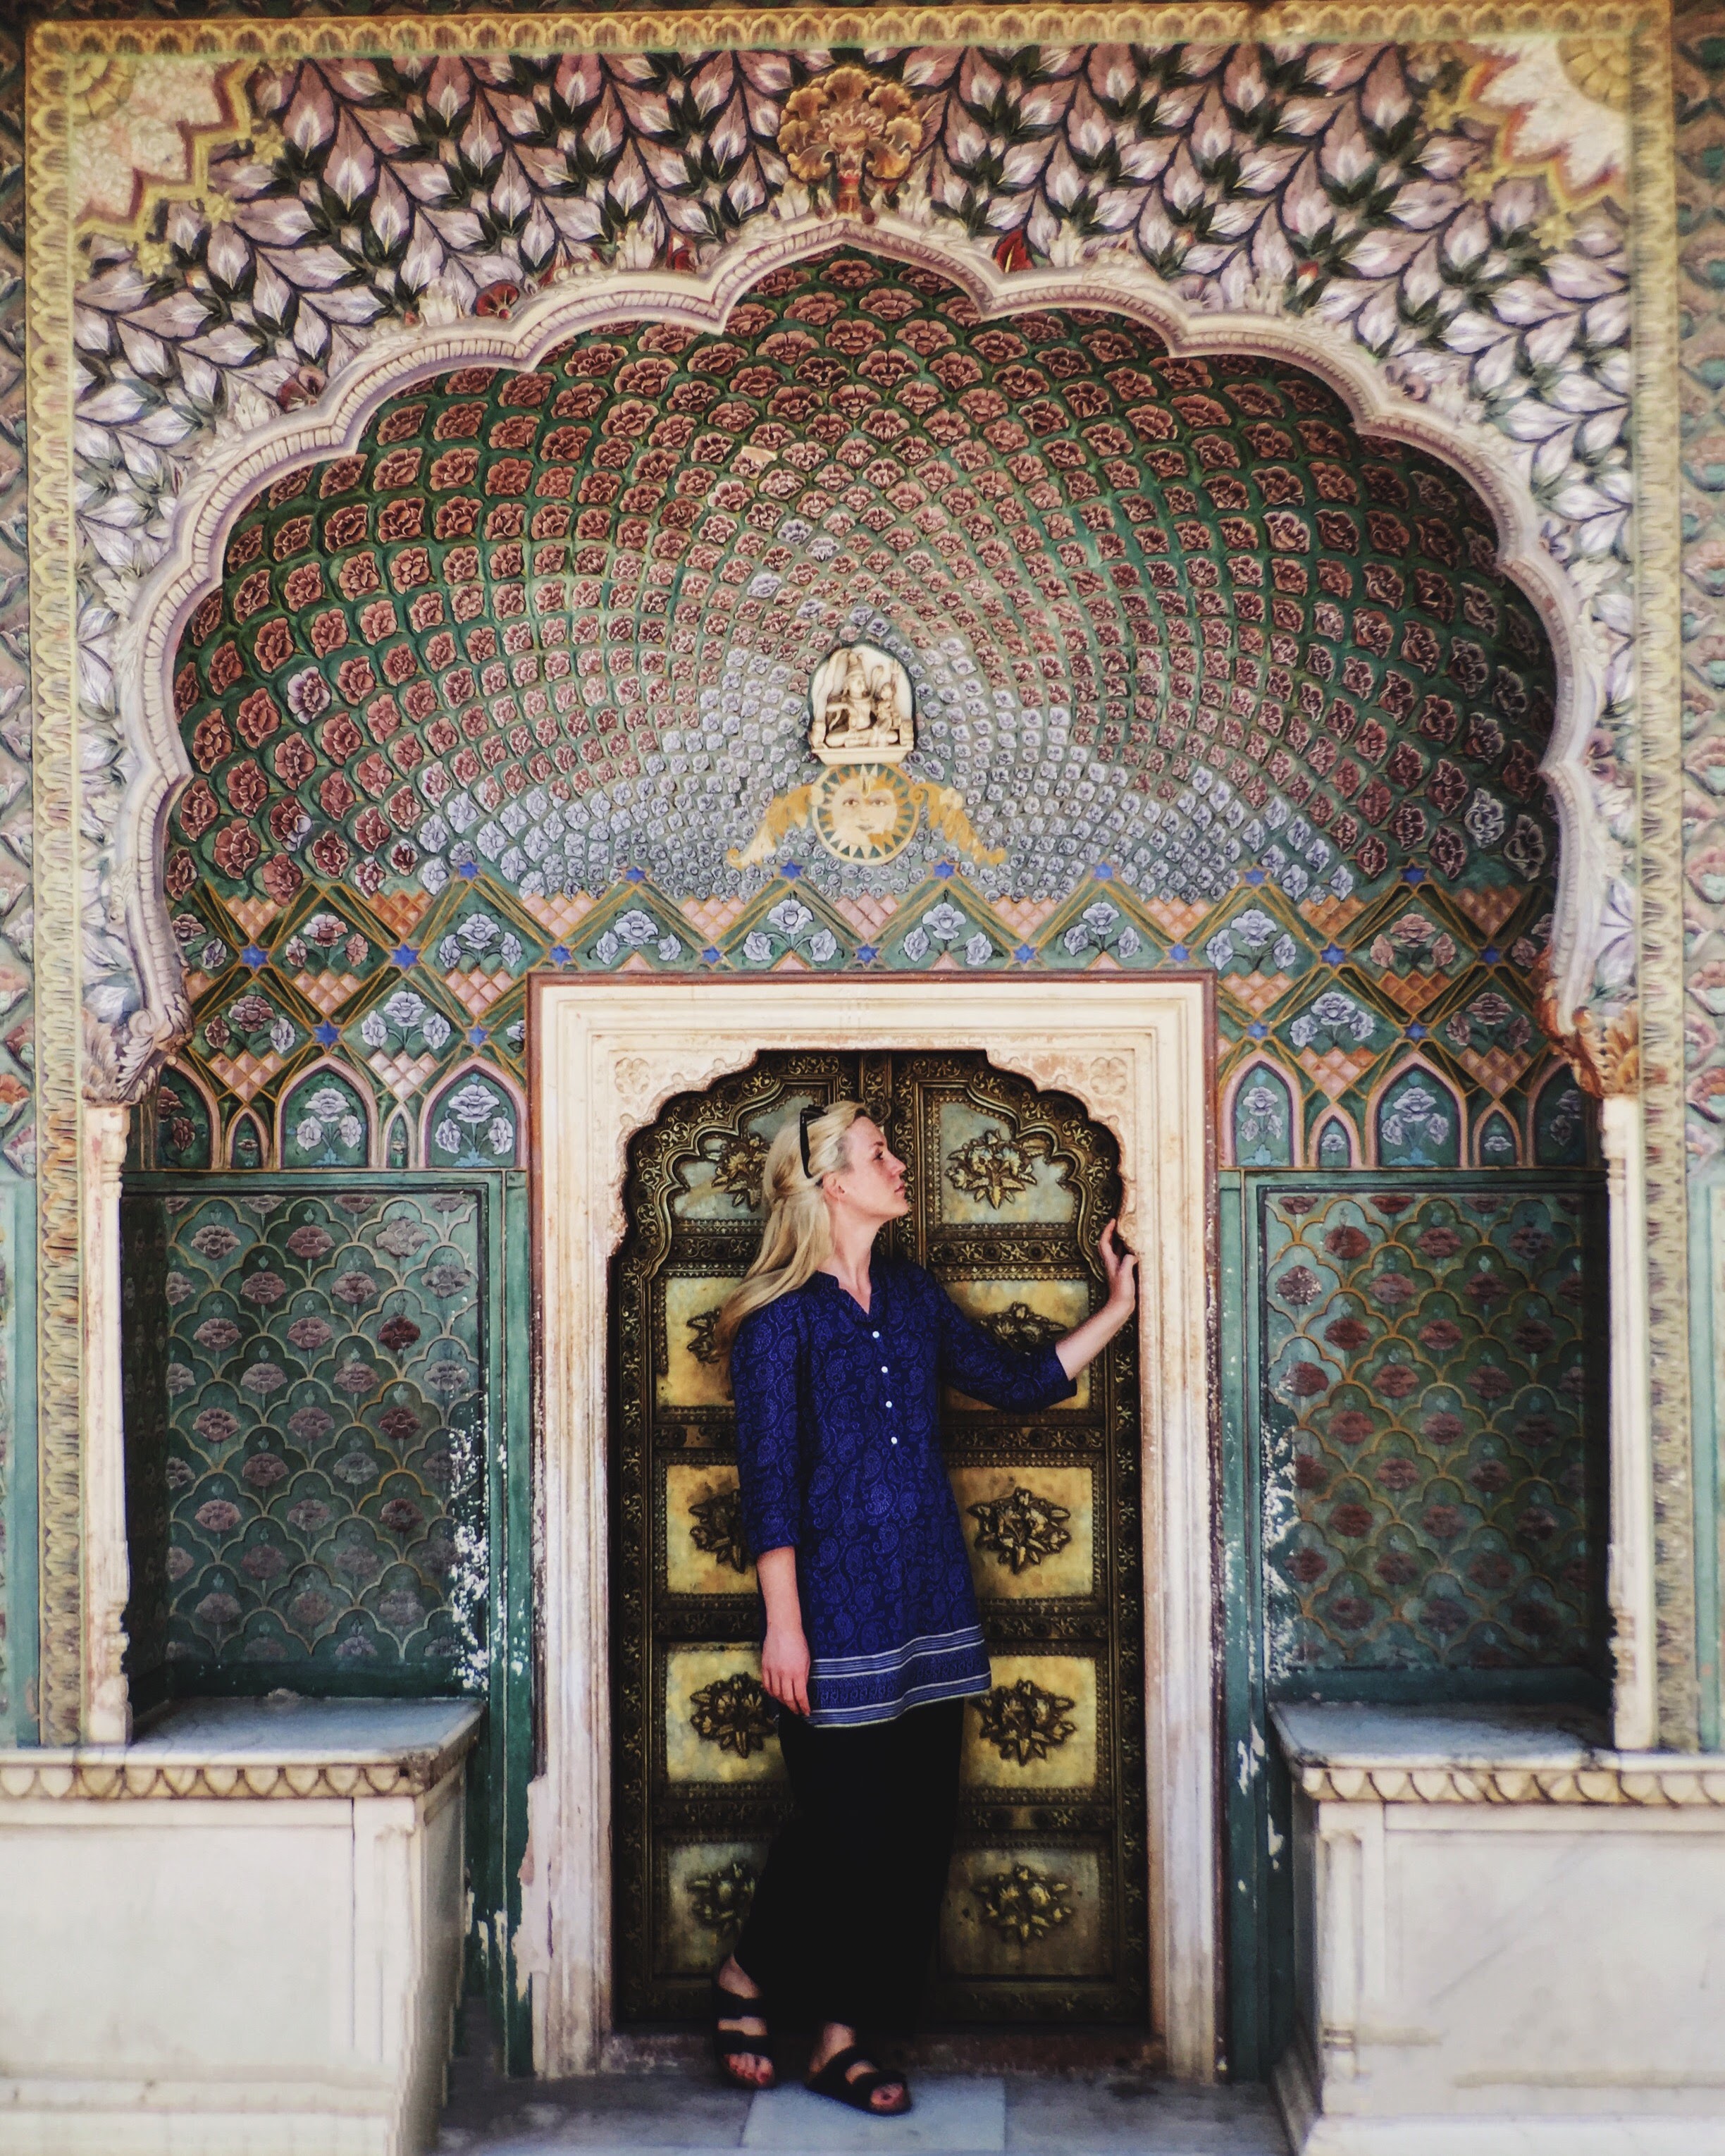 The McHowe World Tour - Part II- Jaipur the Pink City - City Palace